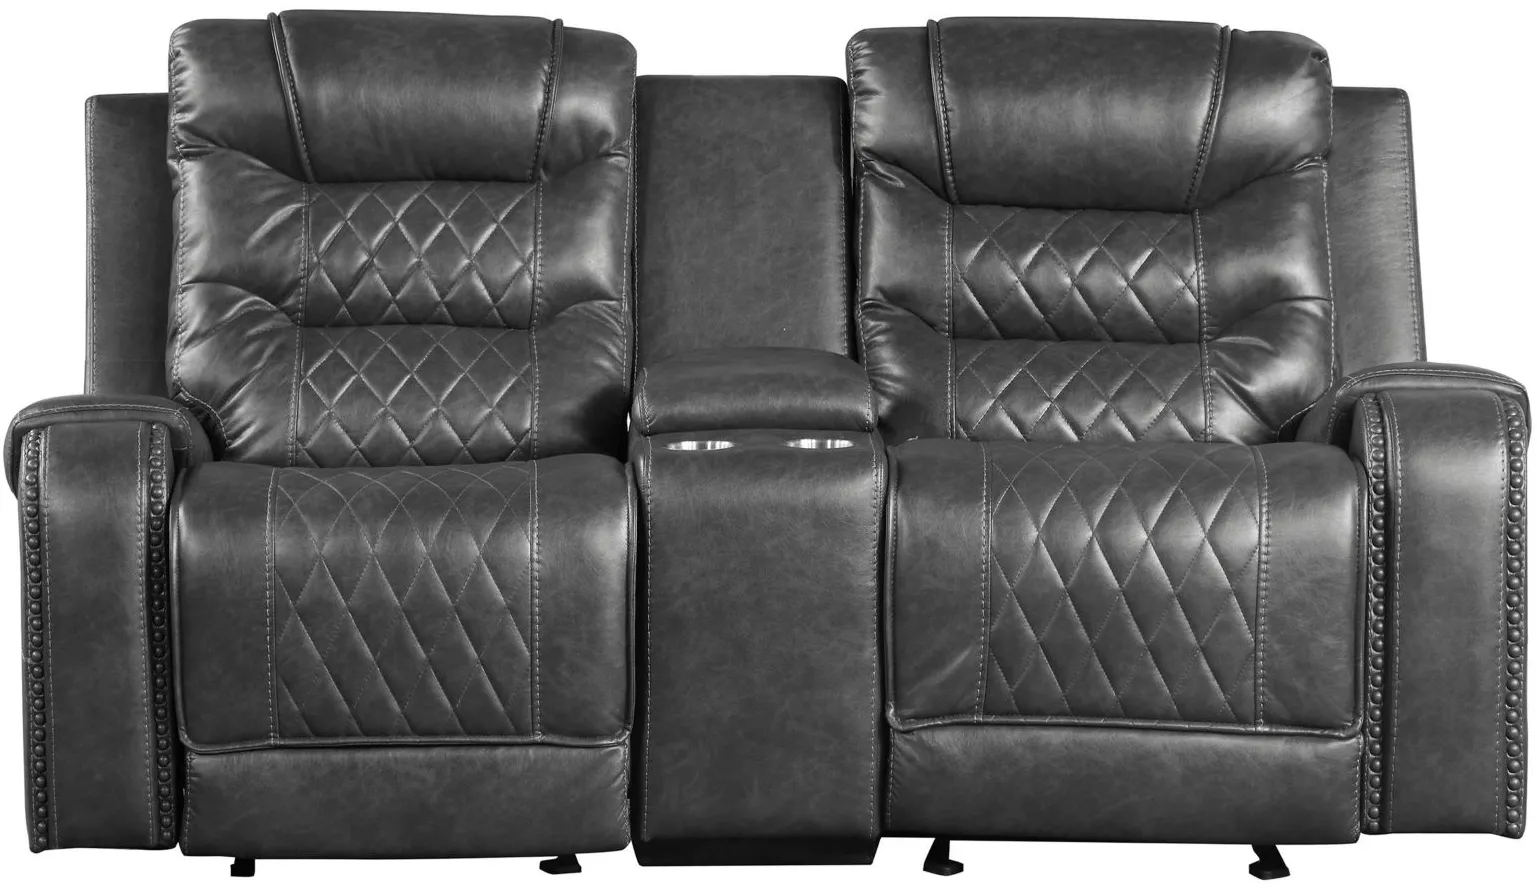 Greenway Double Glider Reclining Loveseat w/ Center Console and USB Port in Gray by Homelegance